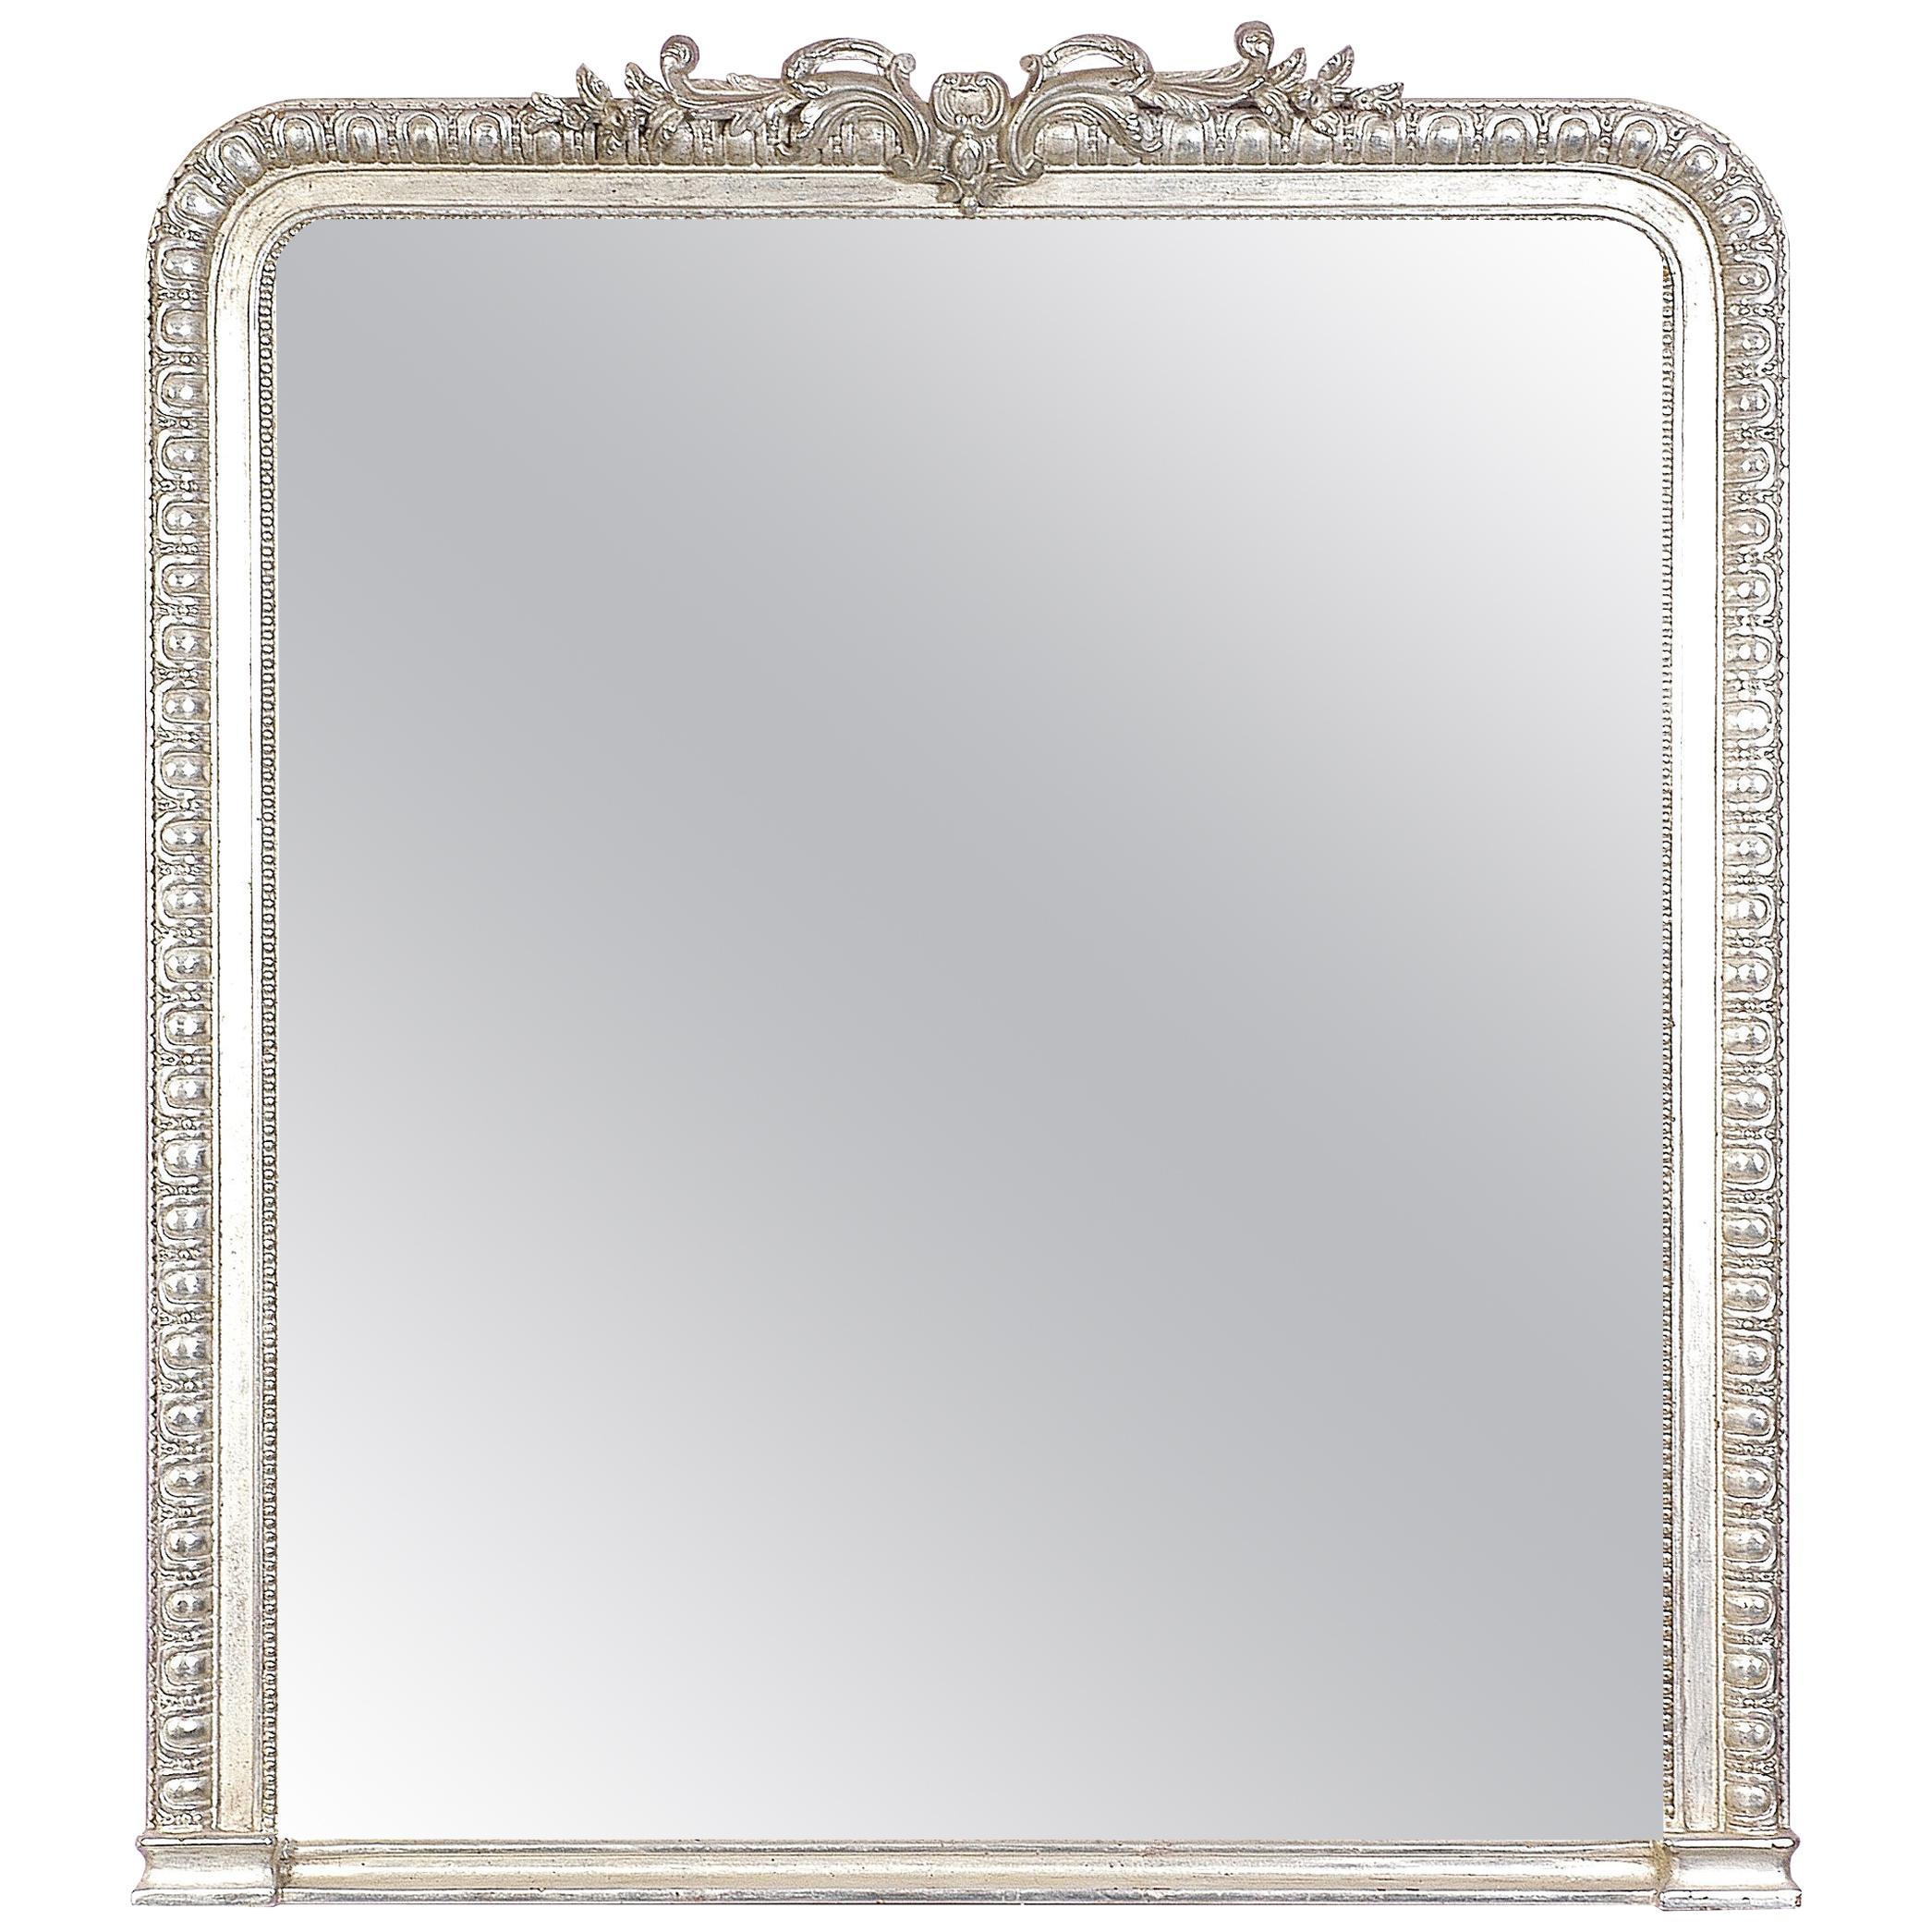 Neoclassical Regency Rectangular Silver Hand Carved Wooden Mirror.